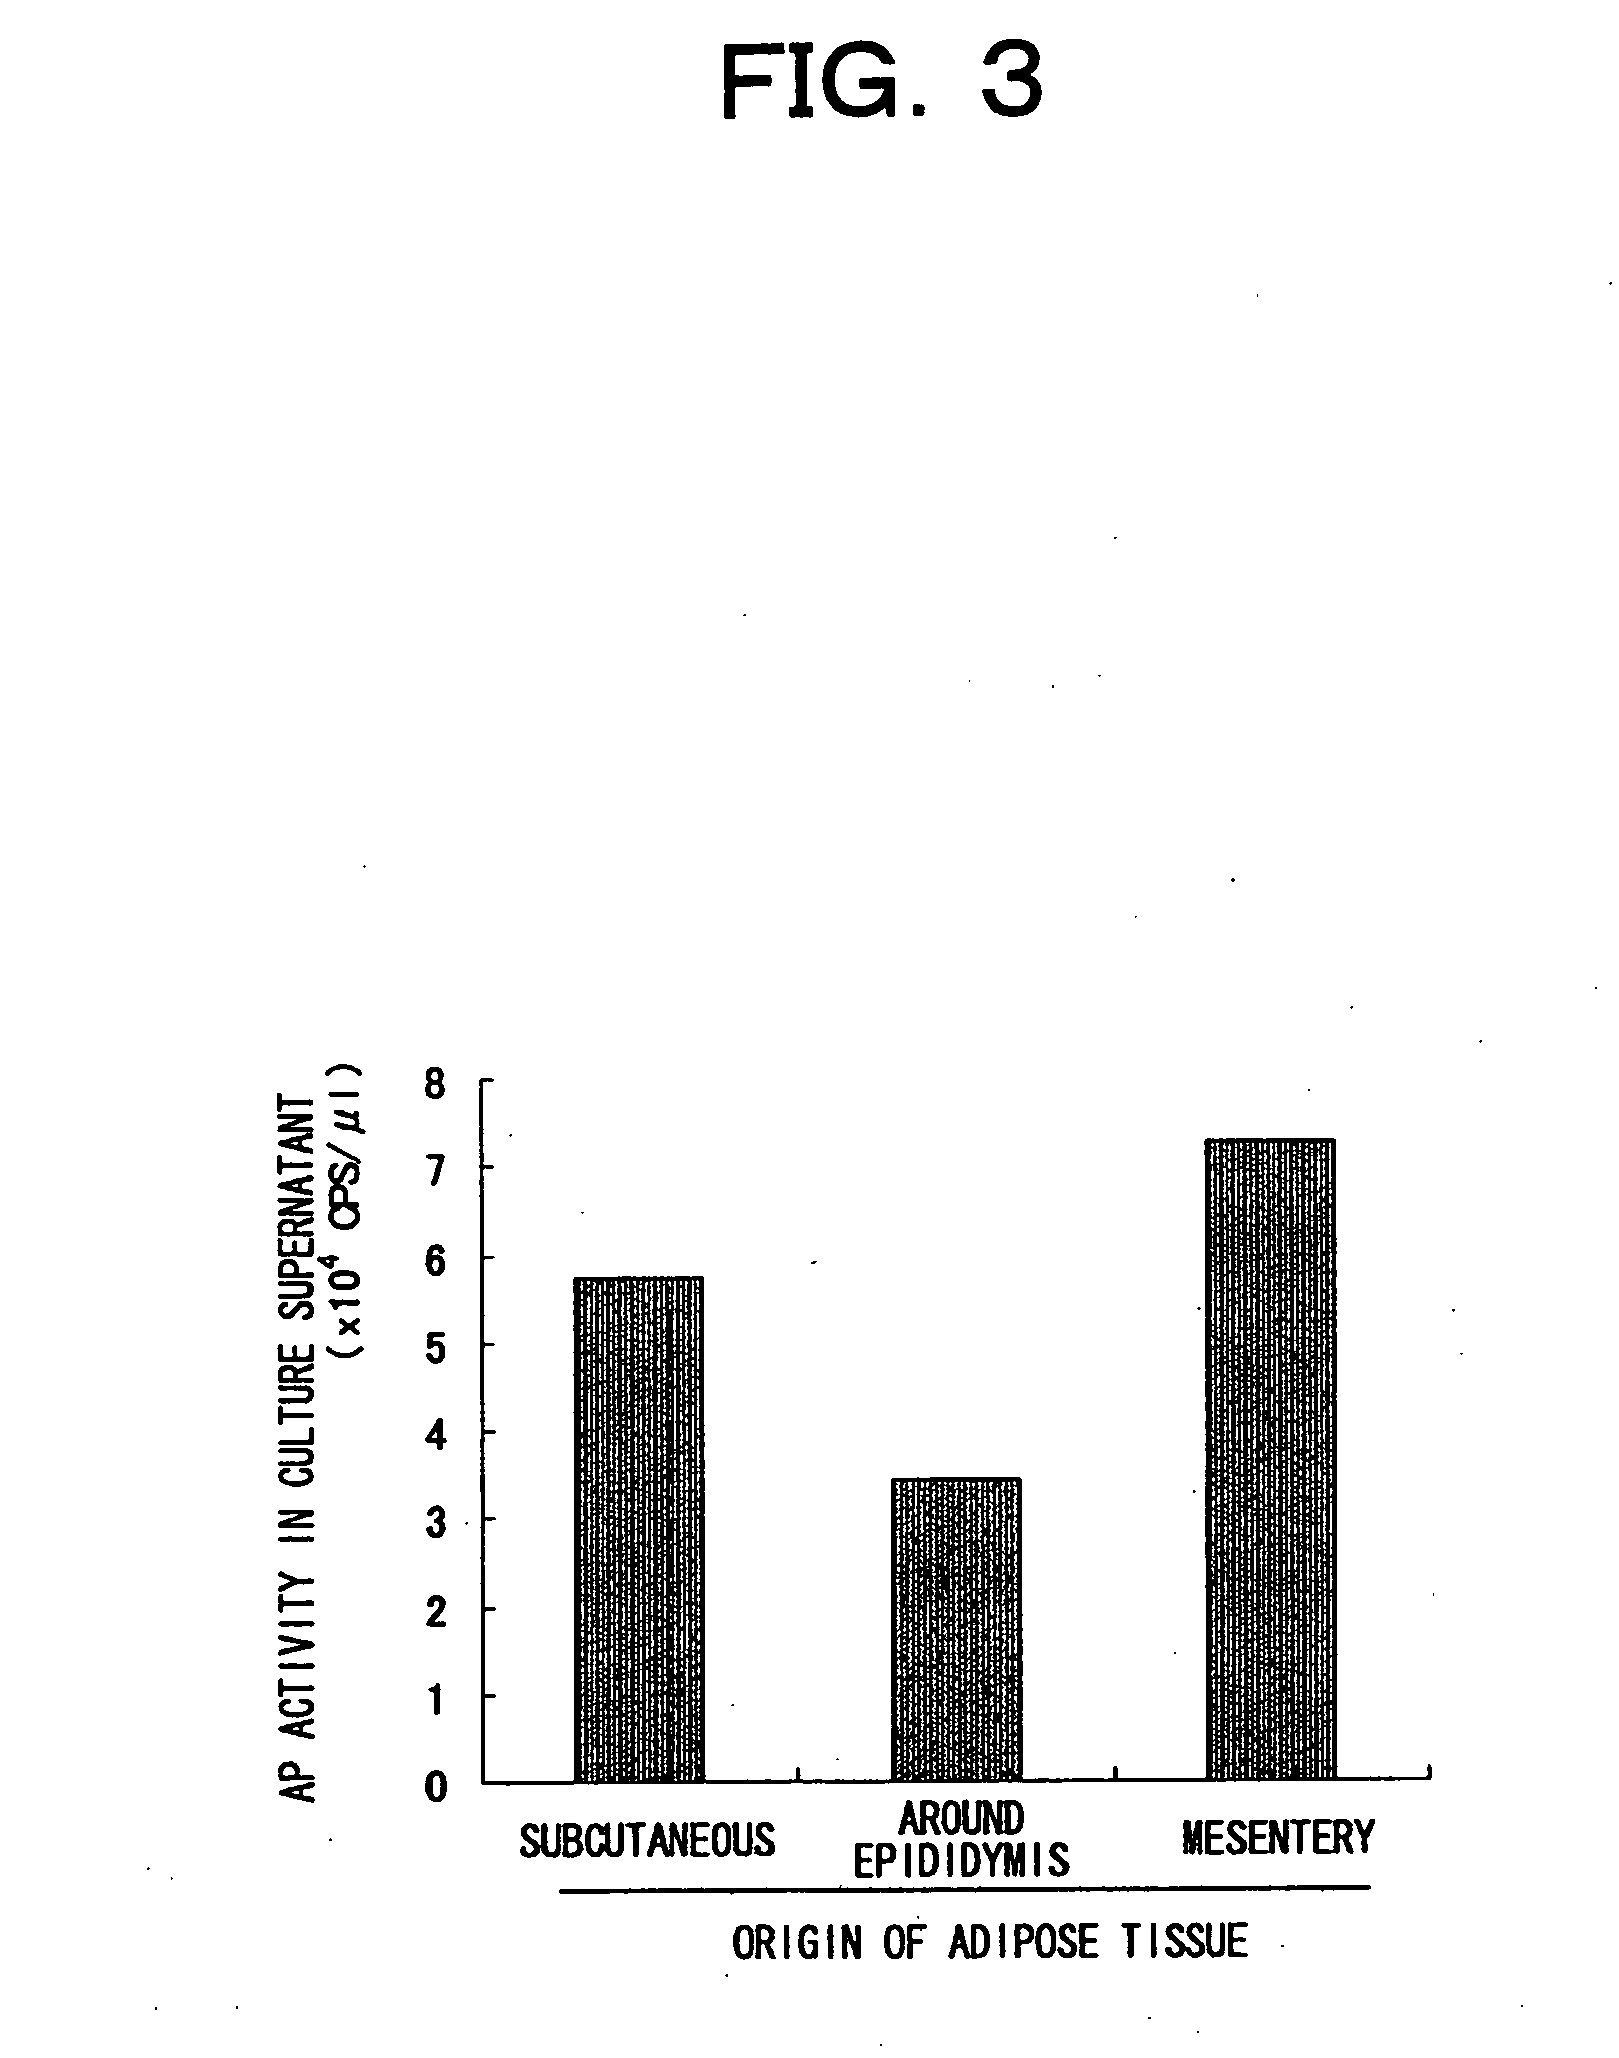 Primarily cultured adipocytes for gene therapy